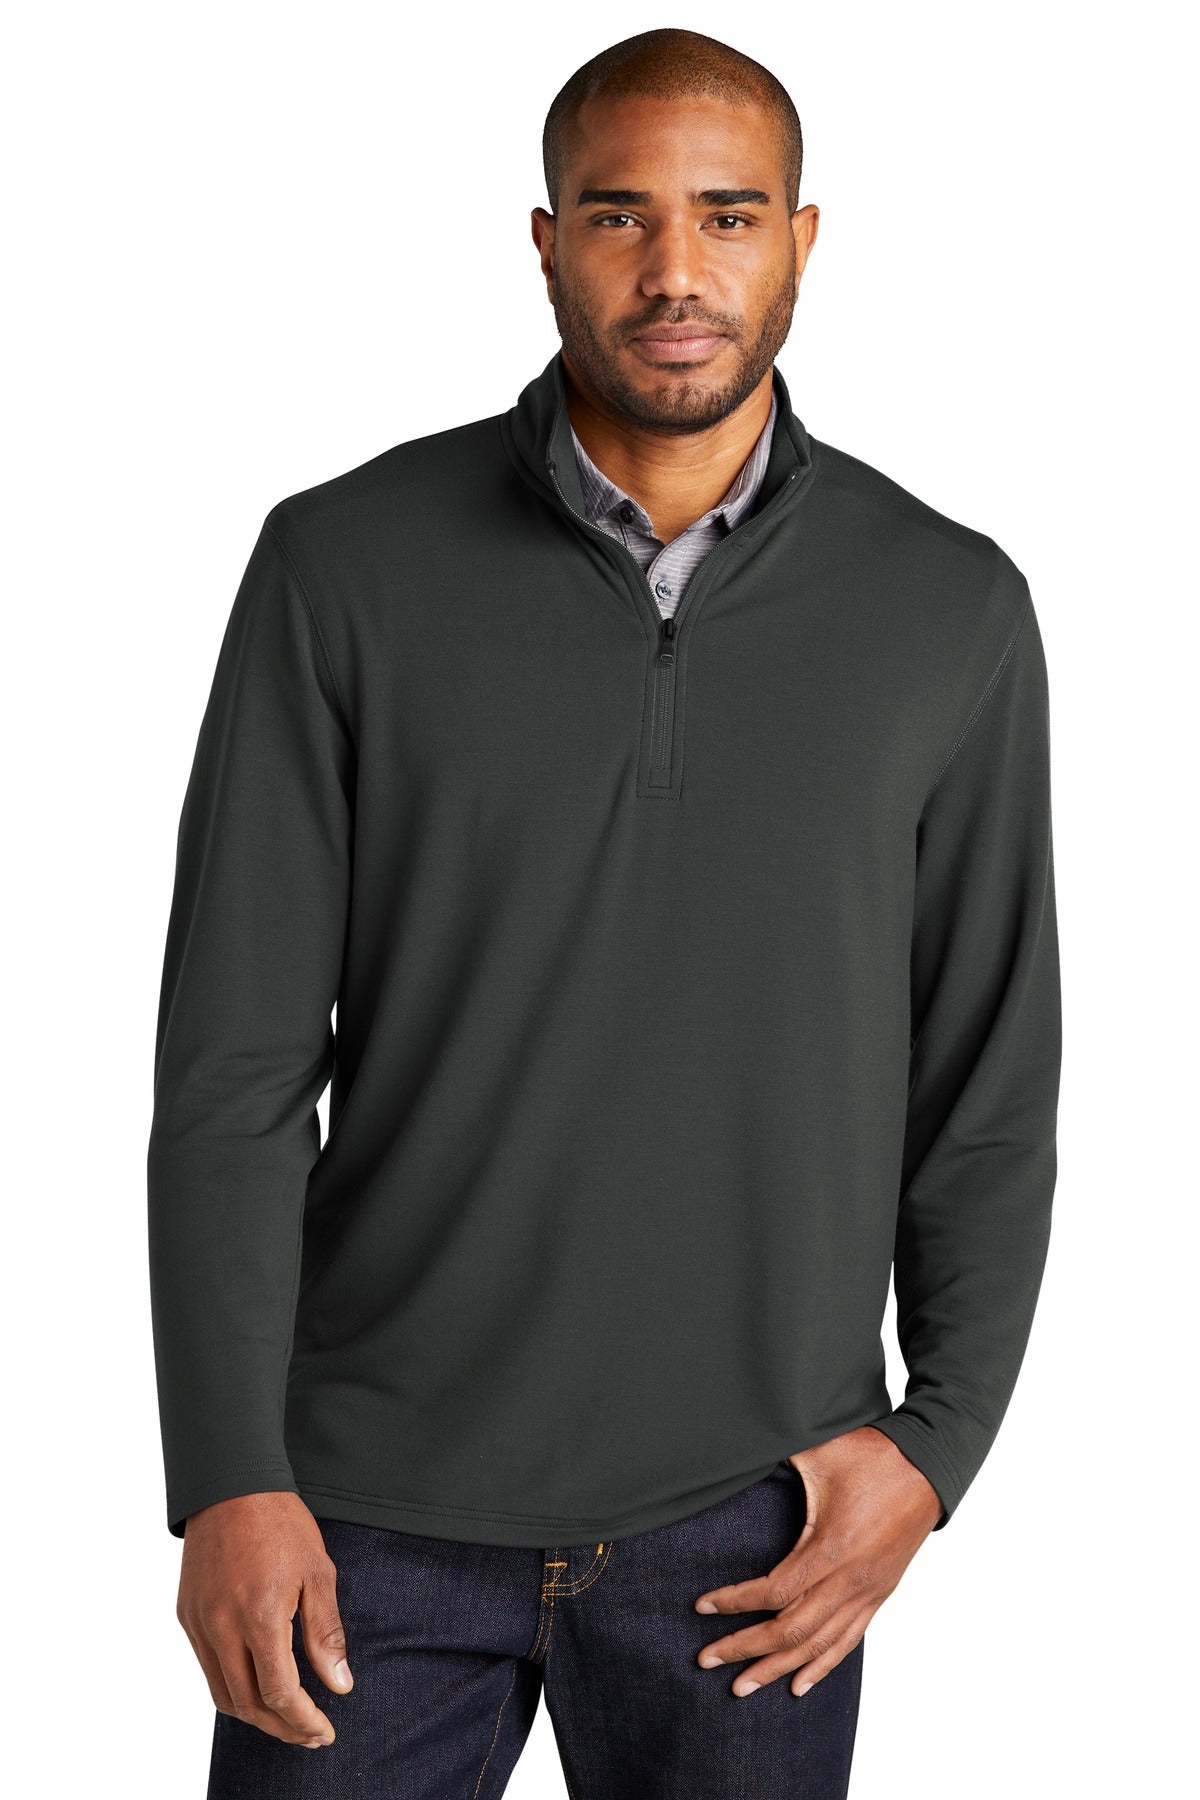 Port Authority® Microterry 1/4-Zip Pullover K825 - DFW Impression